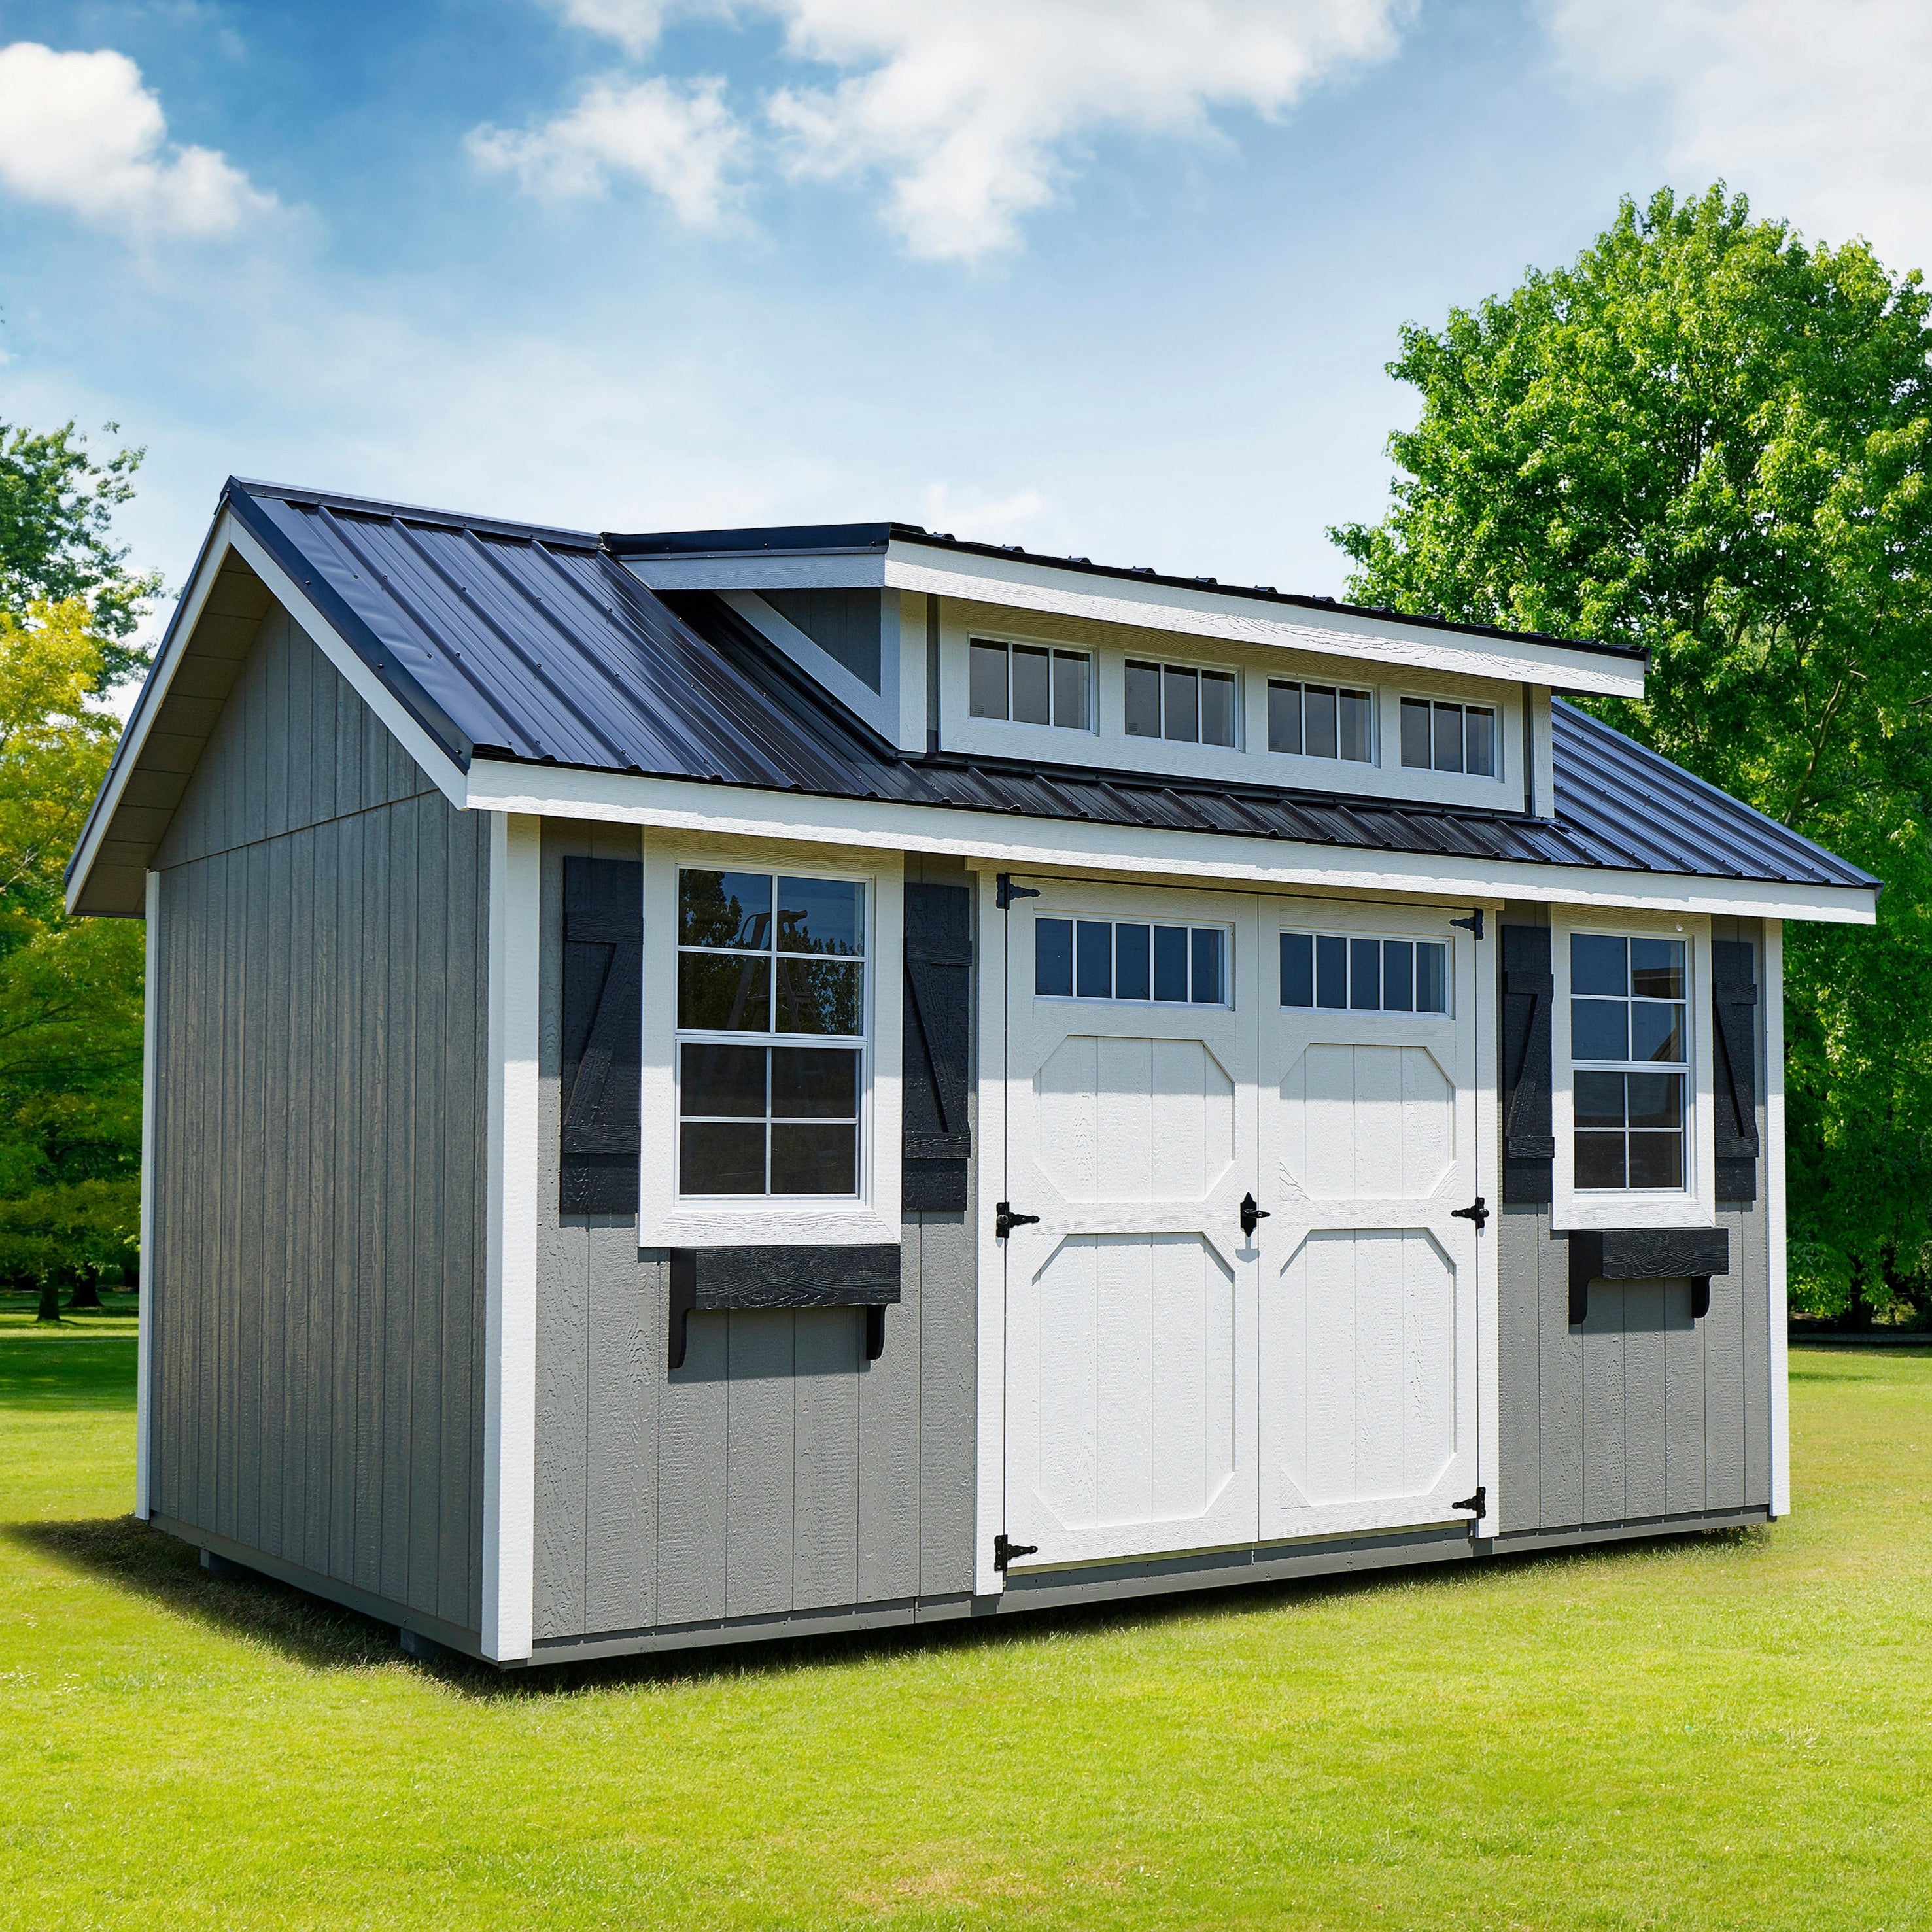 Heritage shed or bunkie